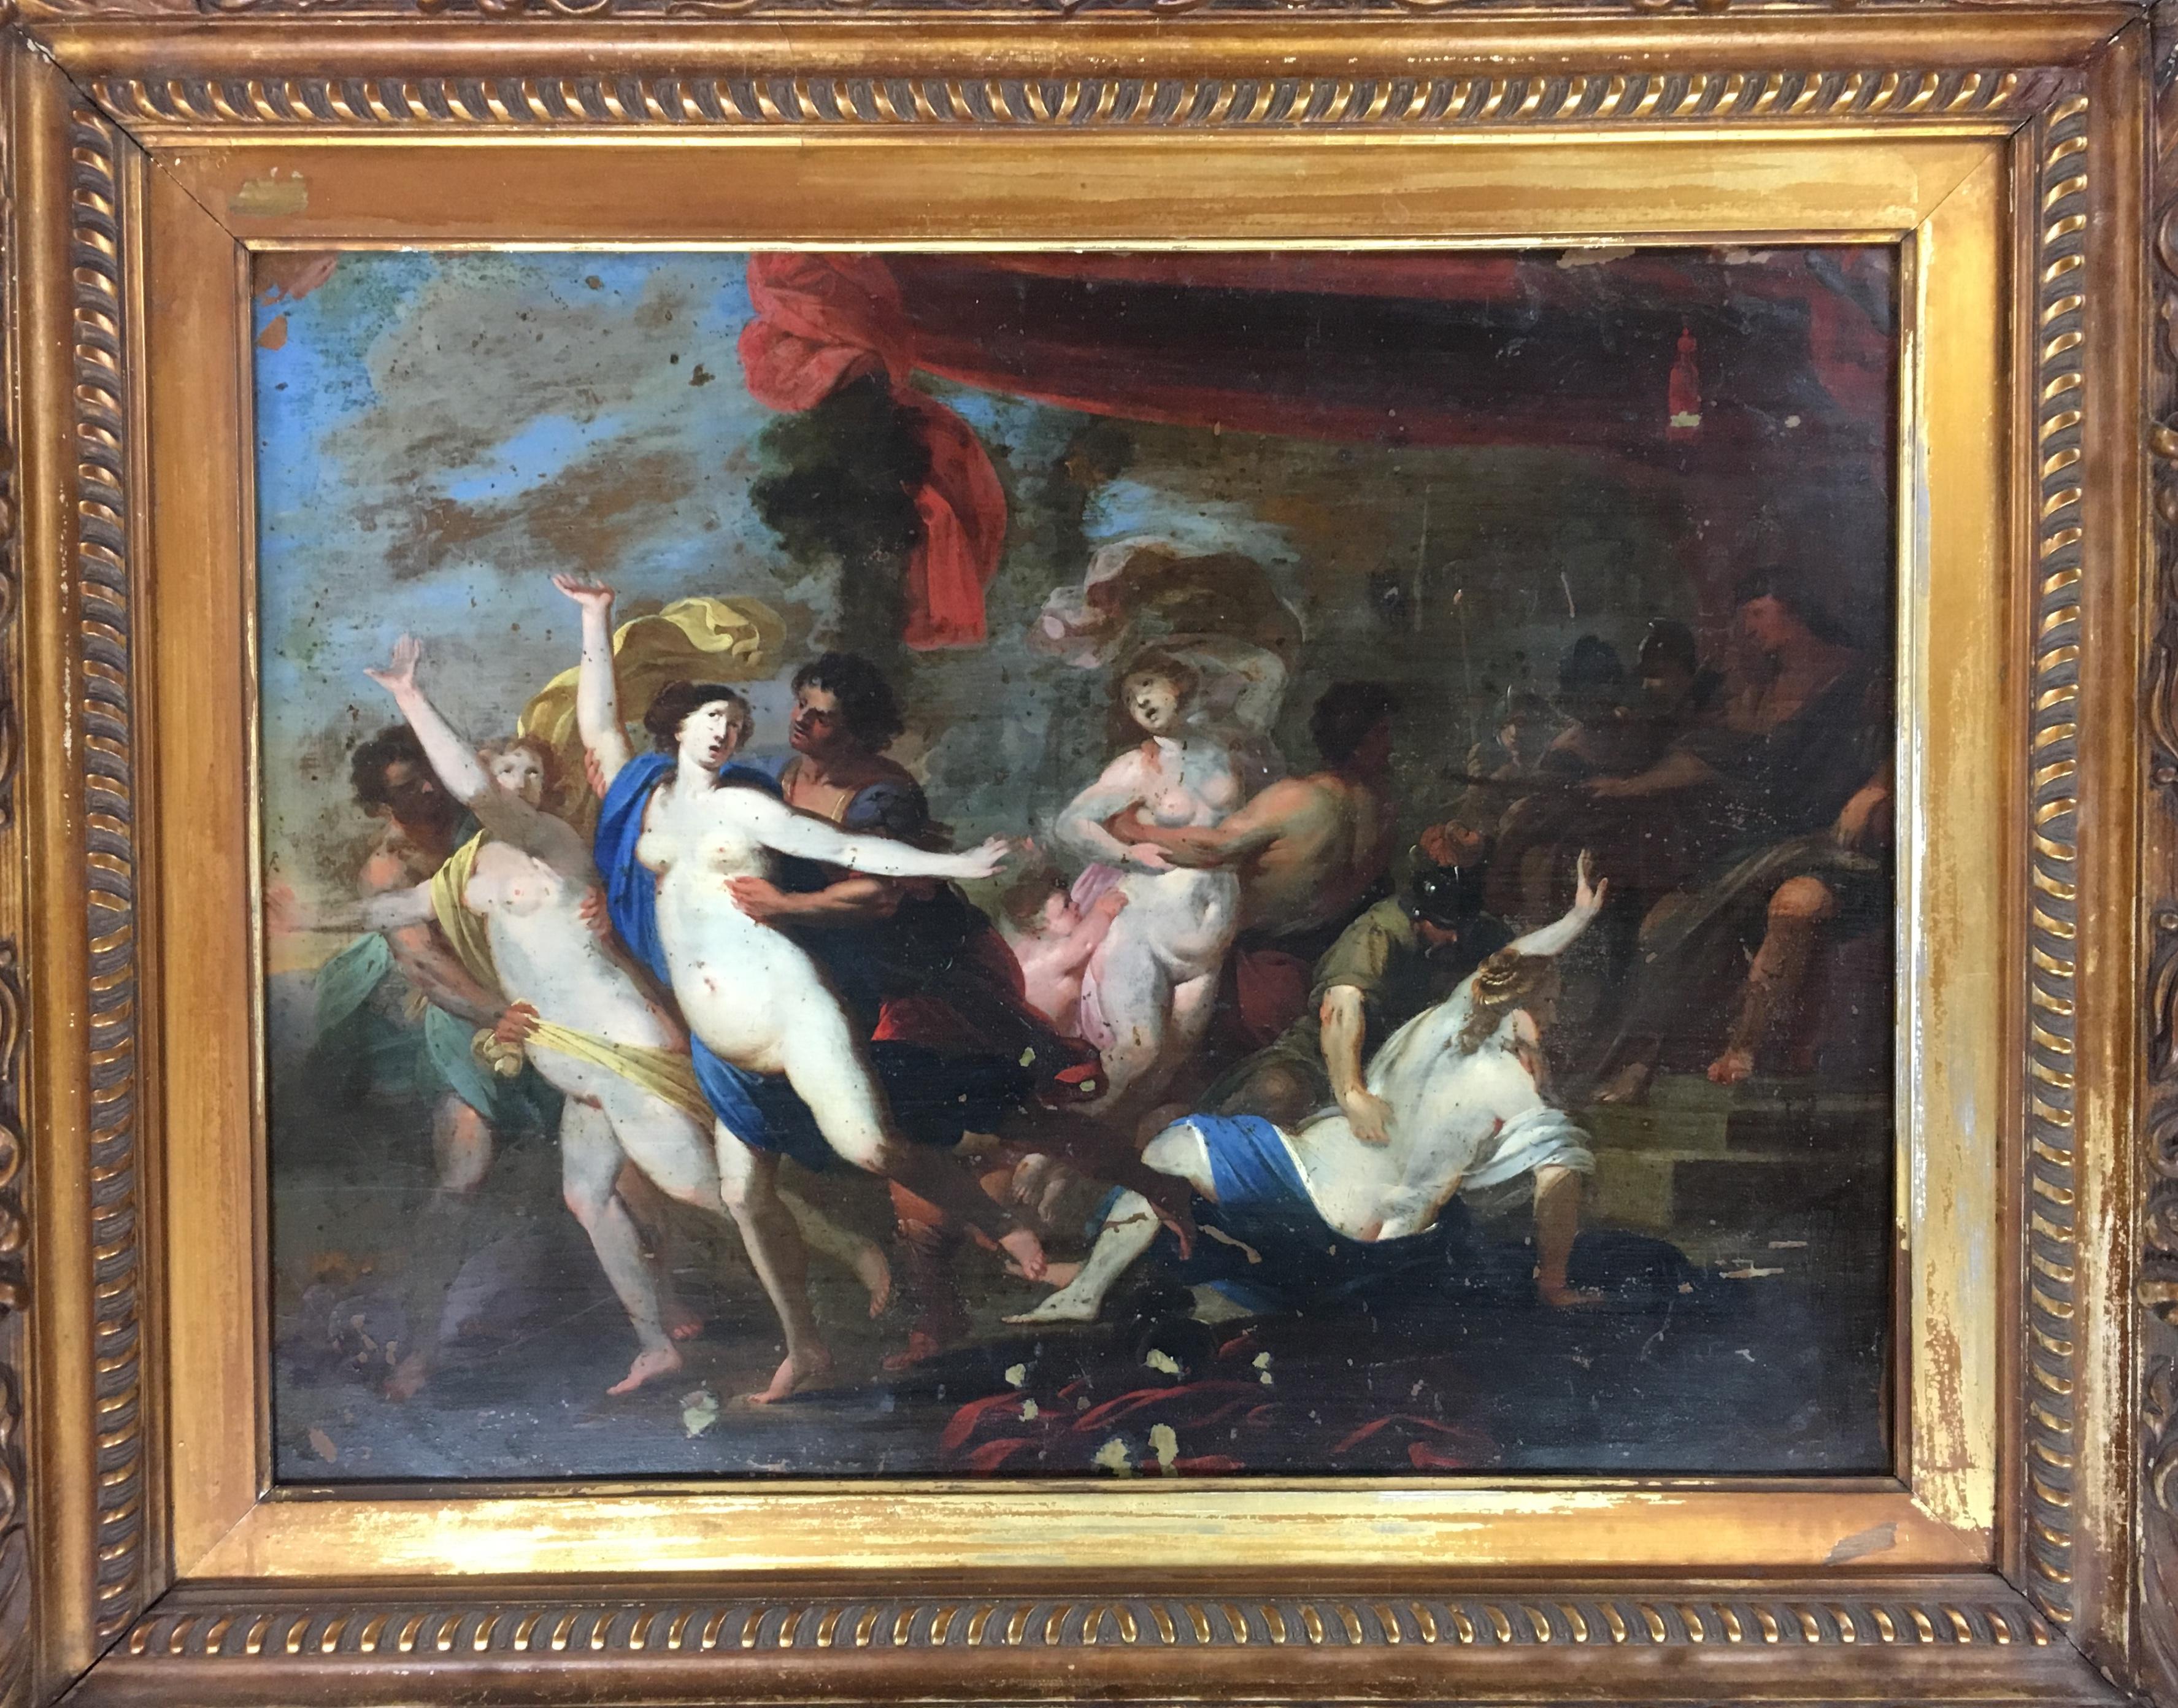 Original 17th century painting attributed to the Circle of Sir Peter Paul Rubens as confirmed by Christies London. 

This beautiful work of art is painted on copper and set in a hand carved 19th century ornate giltwood frame. This traditional